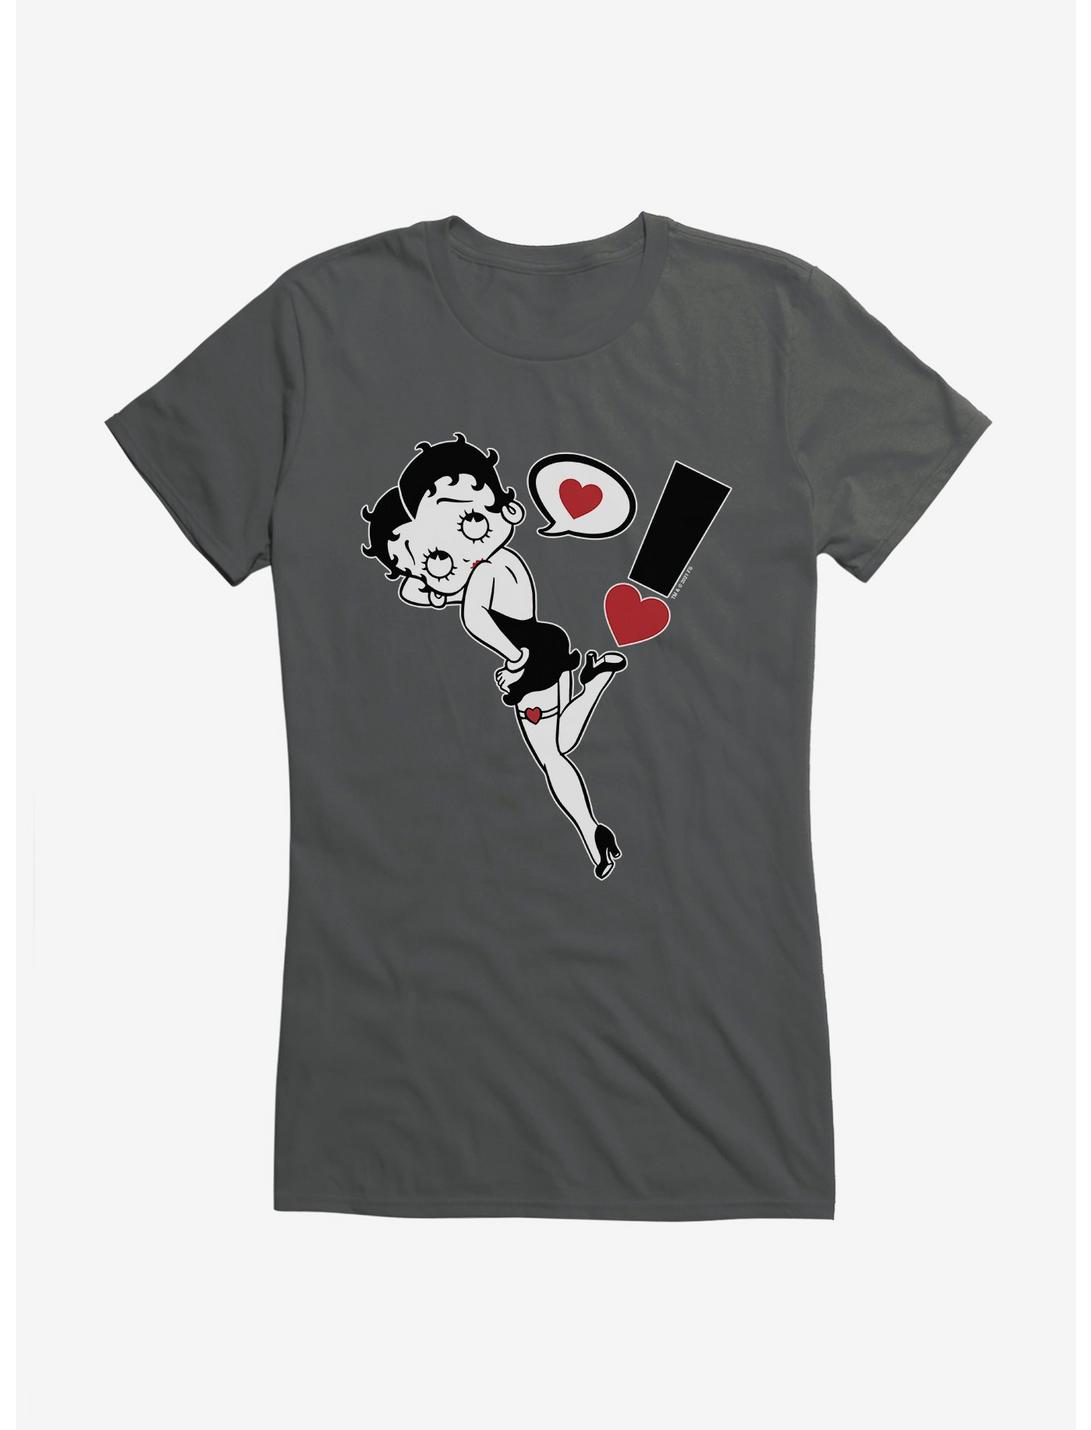 Betty Boop Exclamation of Love  Girls T-Shirt, , hi-res